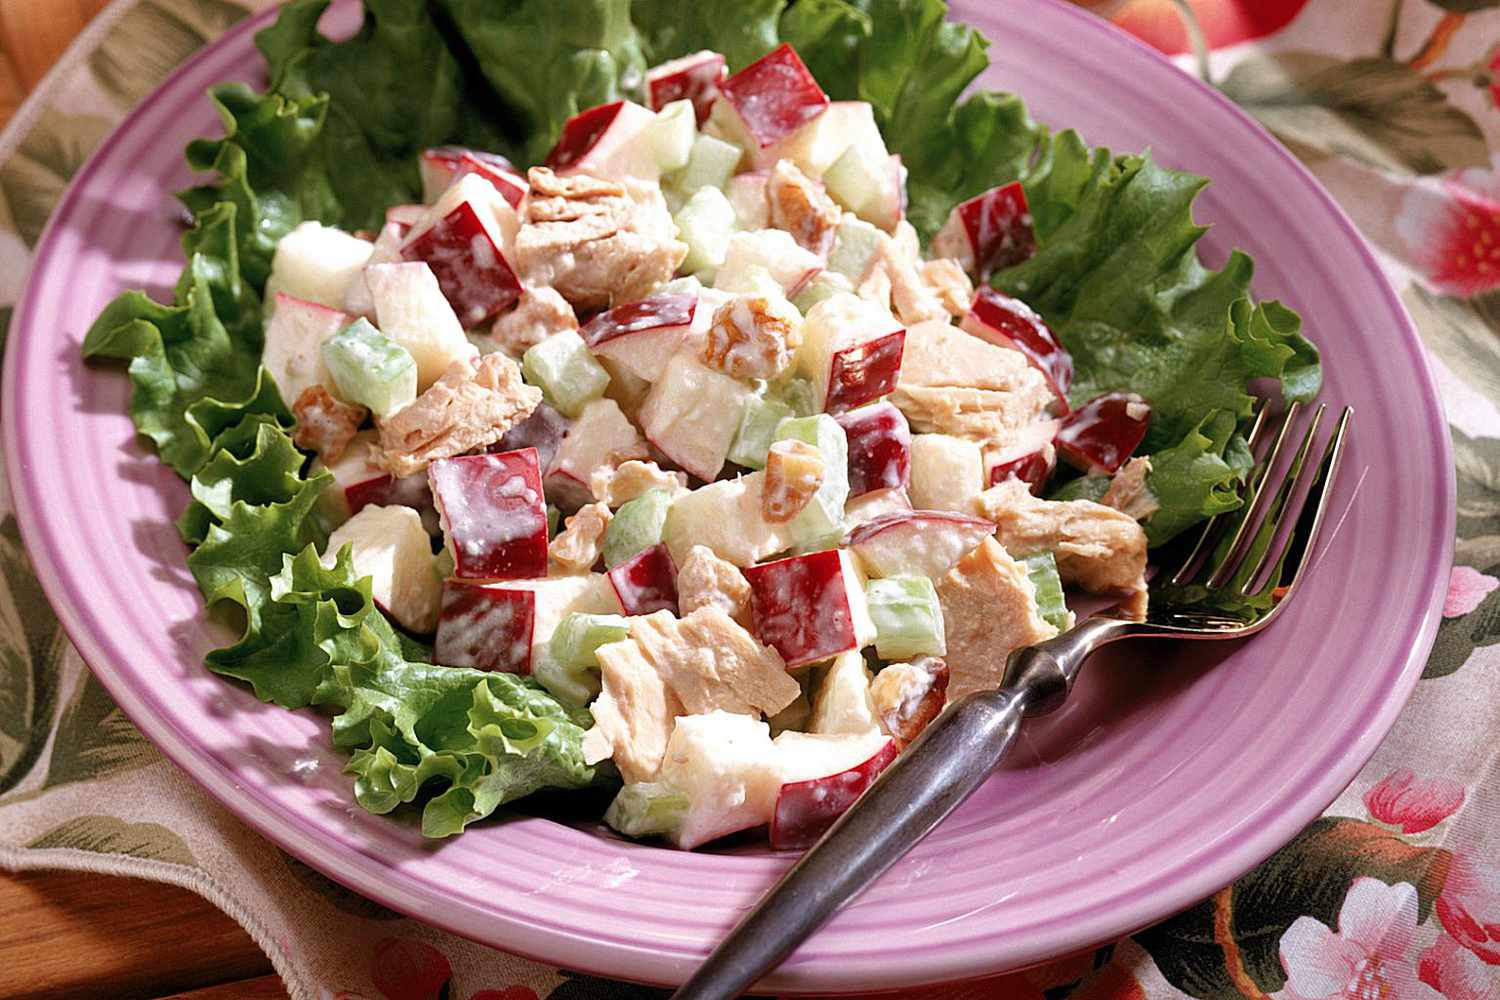 Must Enjoy these Chicken and apple salad with honey vinaigrette